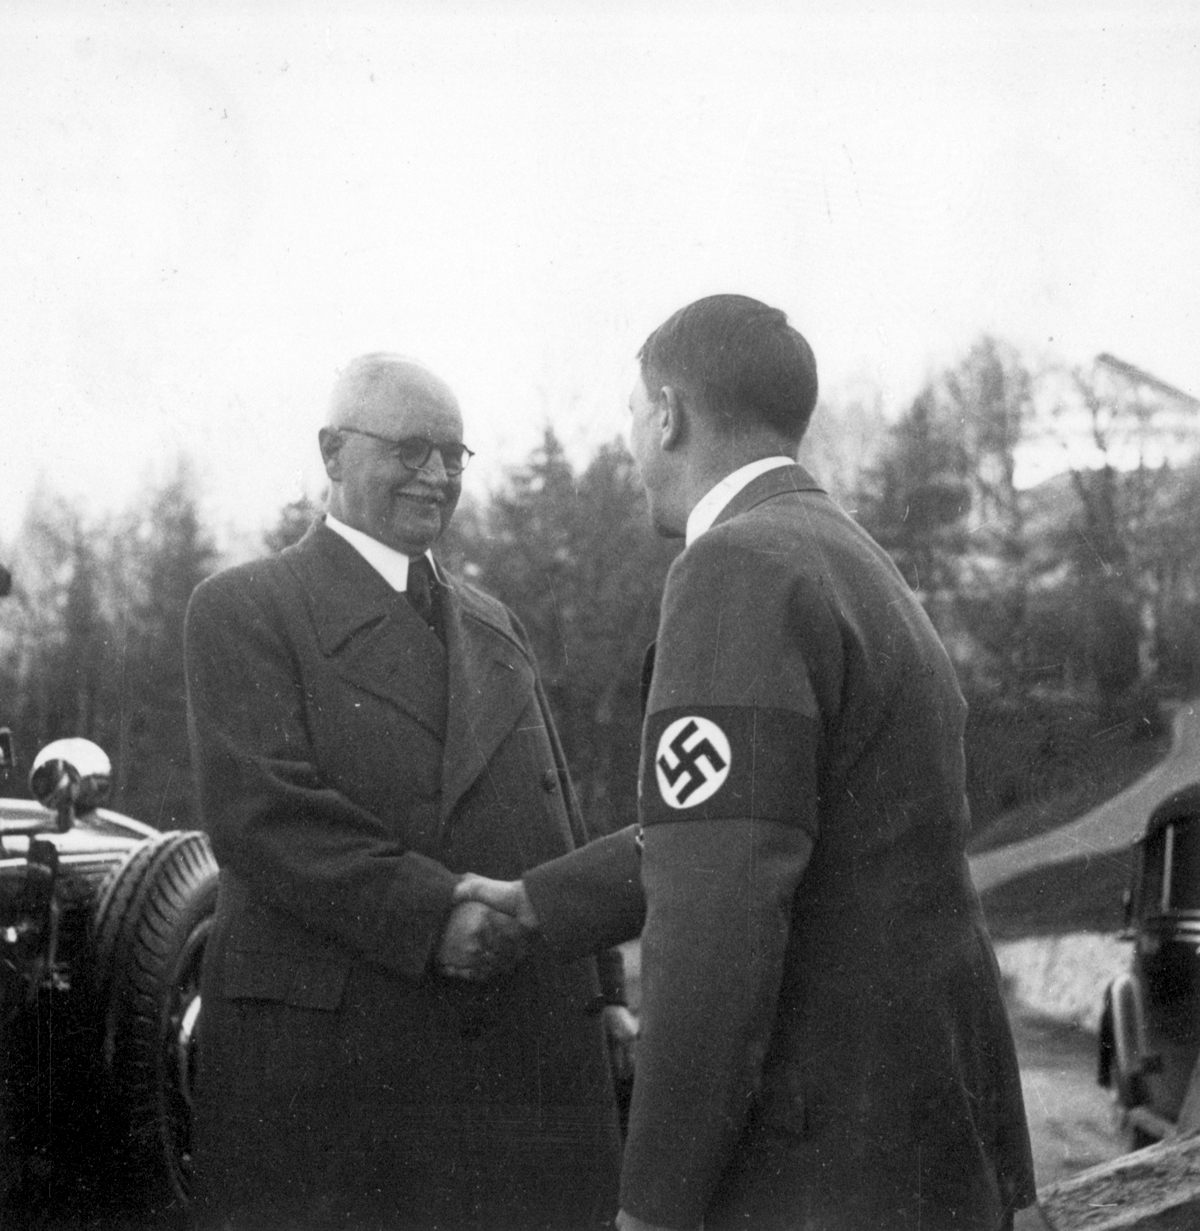 Adolf Hitler welcomes Franz Xaver Schwarz at the Berghof for his birthday, from Eva Braun's albums